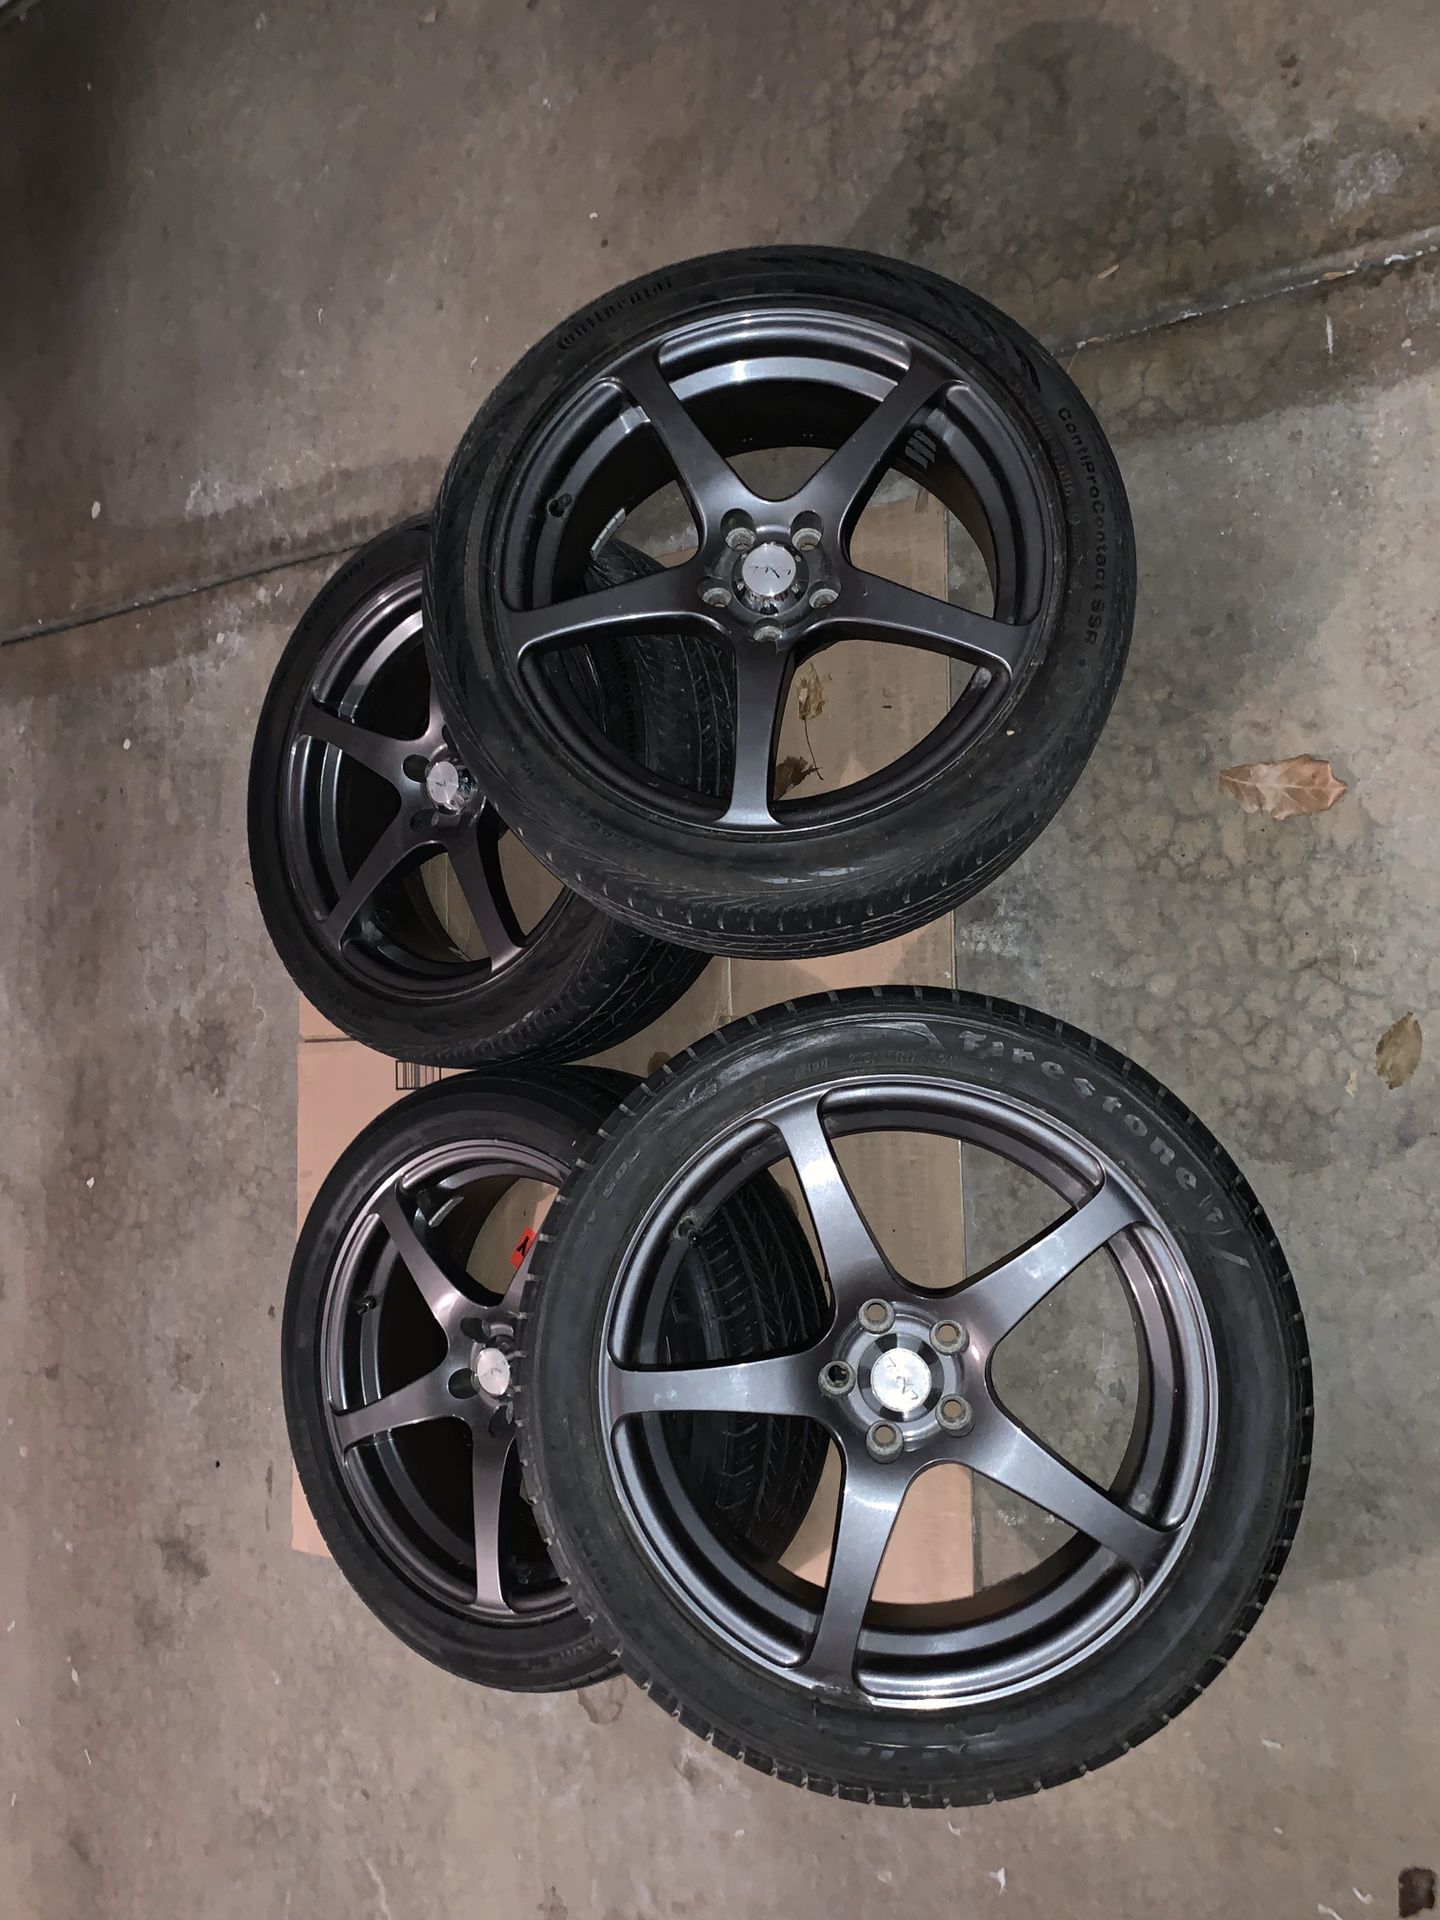 225/45R/17 Wheels And Tires Rims Toyota Scion 5x100